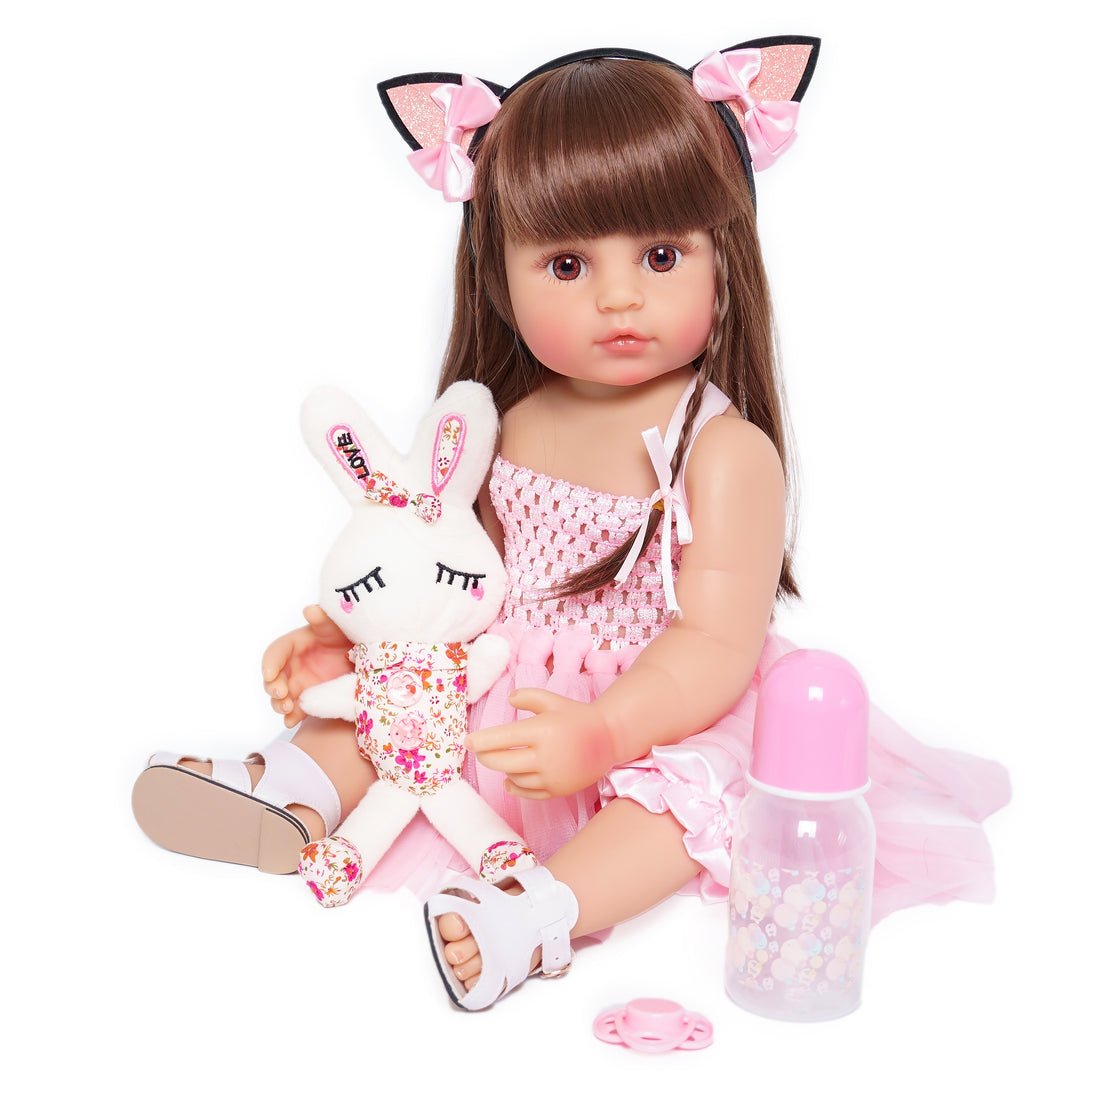 Lifelike Reborn Baby Dolls: Artistry, Authenticity, and Therapeutic Elegance Unveiled